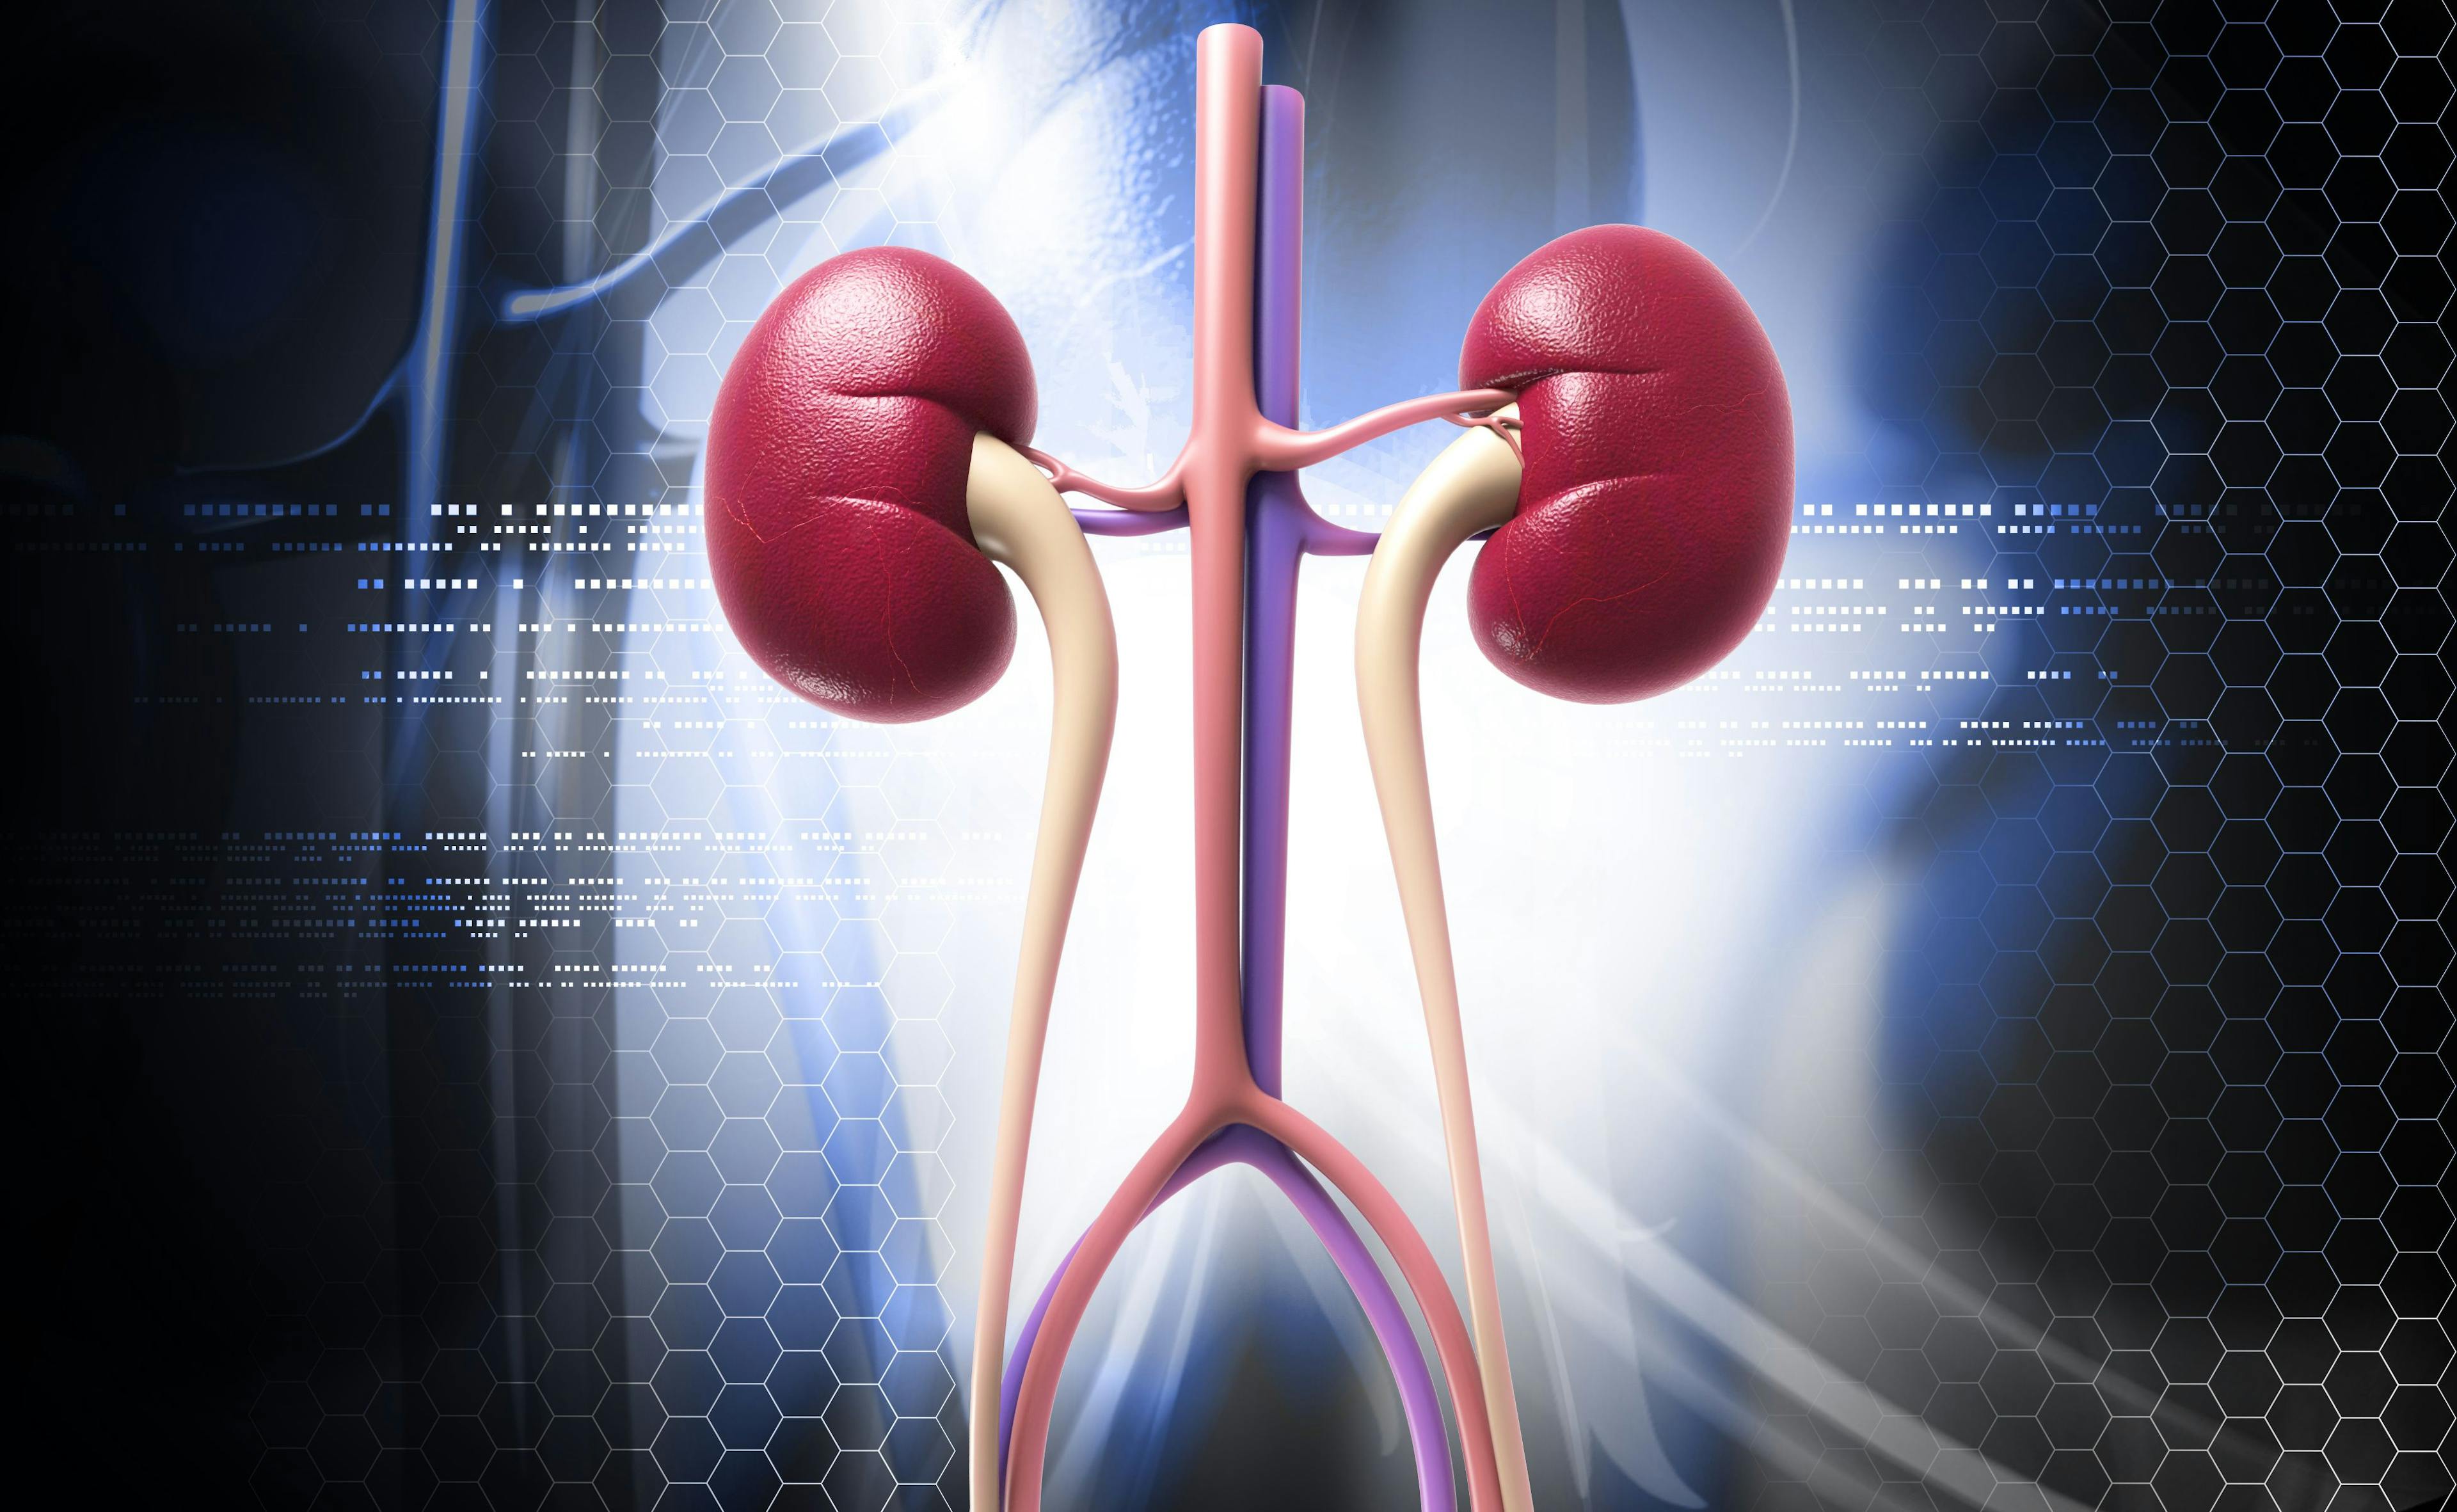 Remove Race From Equation Used to Assess Kidney Function, Researchers Say